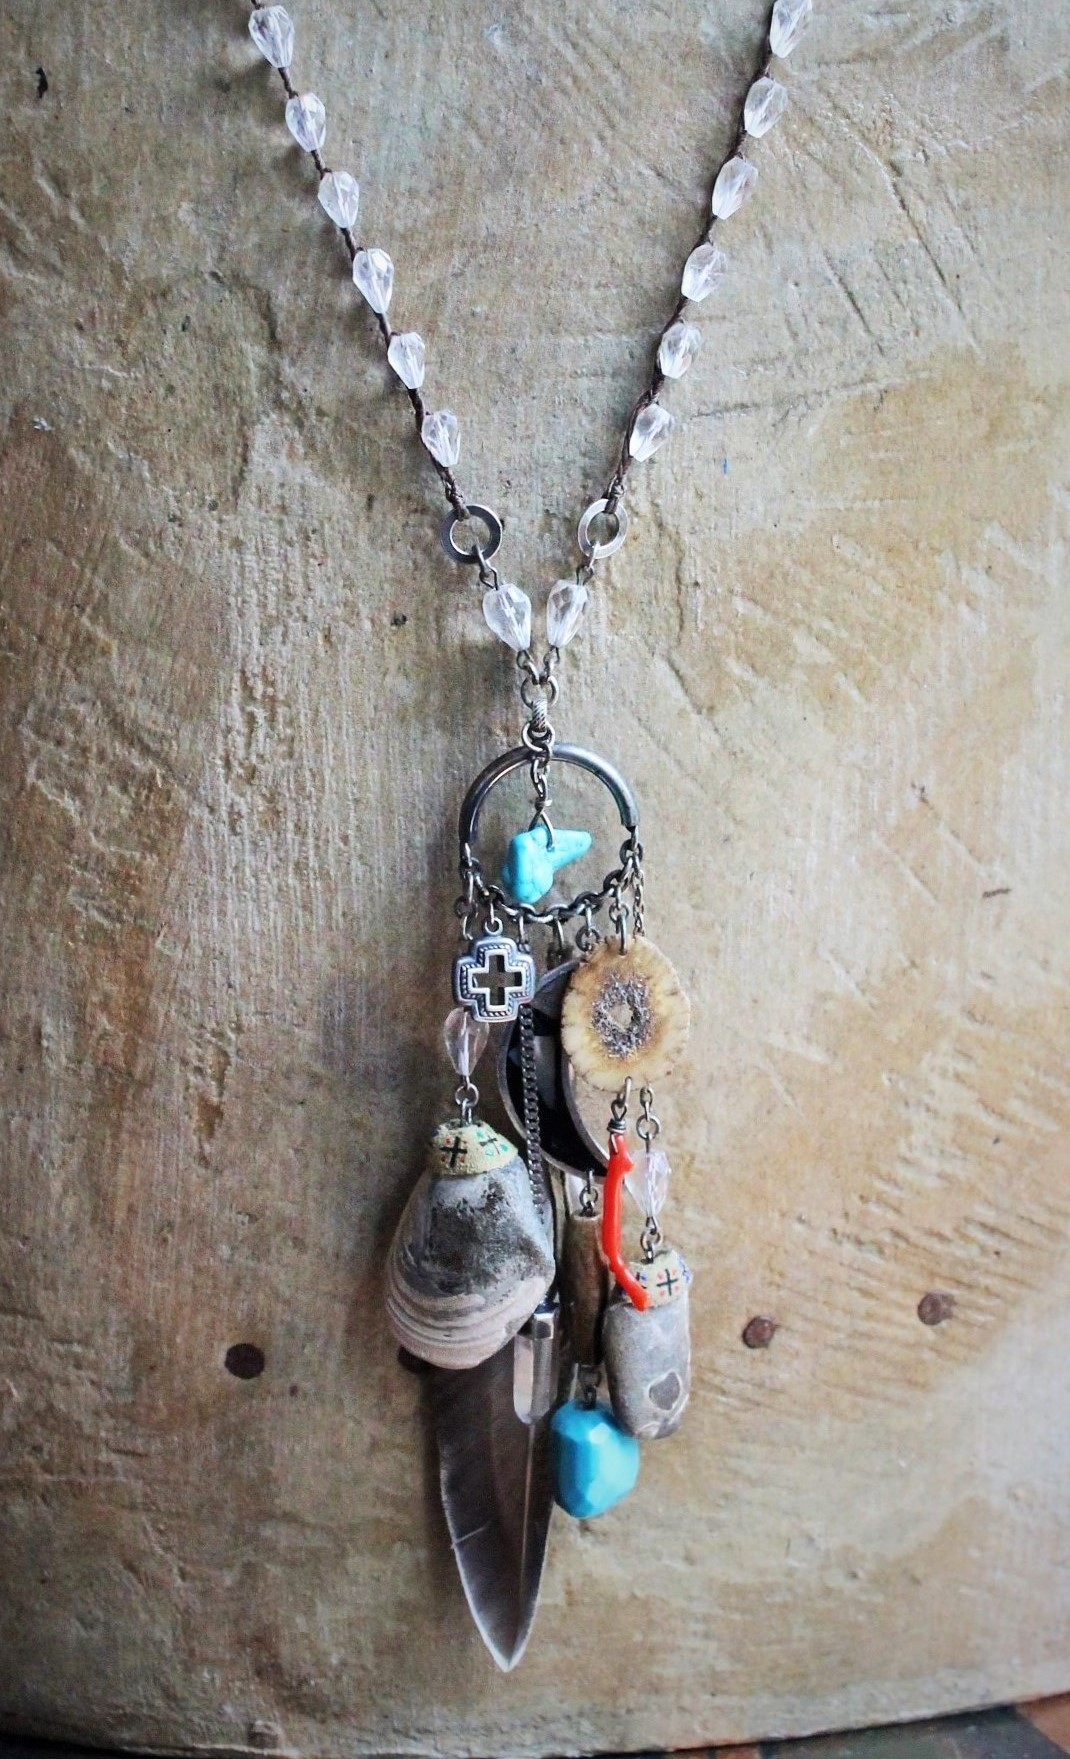 The 4 Elements Amulet Necklace w/Hand Crocheted Rock Crystal Bead Chain, Ancient Shell Fossils,Antique Sterling Inlay Crescent Moon,Rare Faceted Turquoise Nugget,Sterling 4 Way Cross & More!